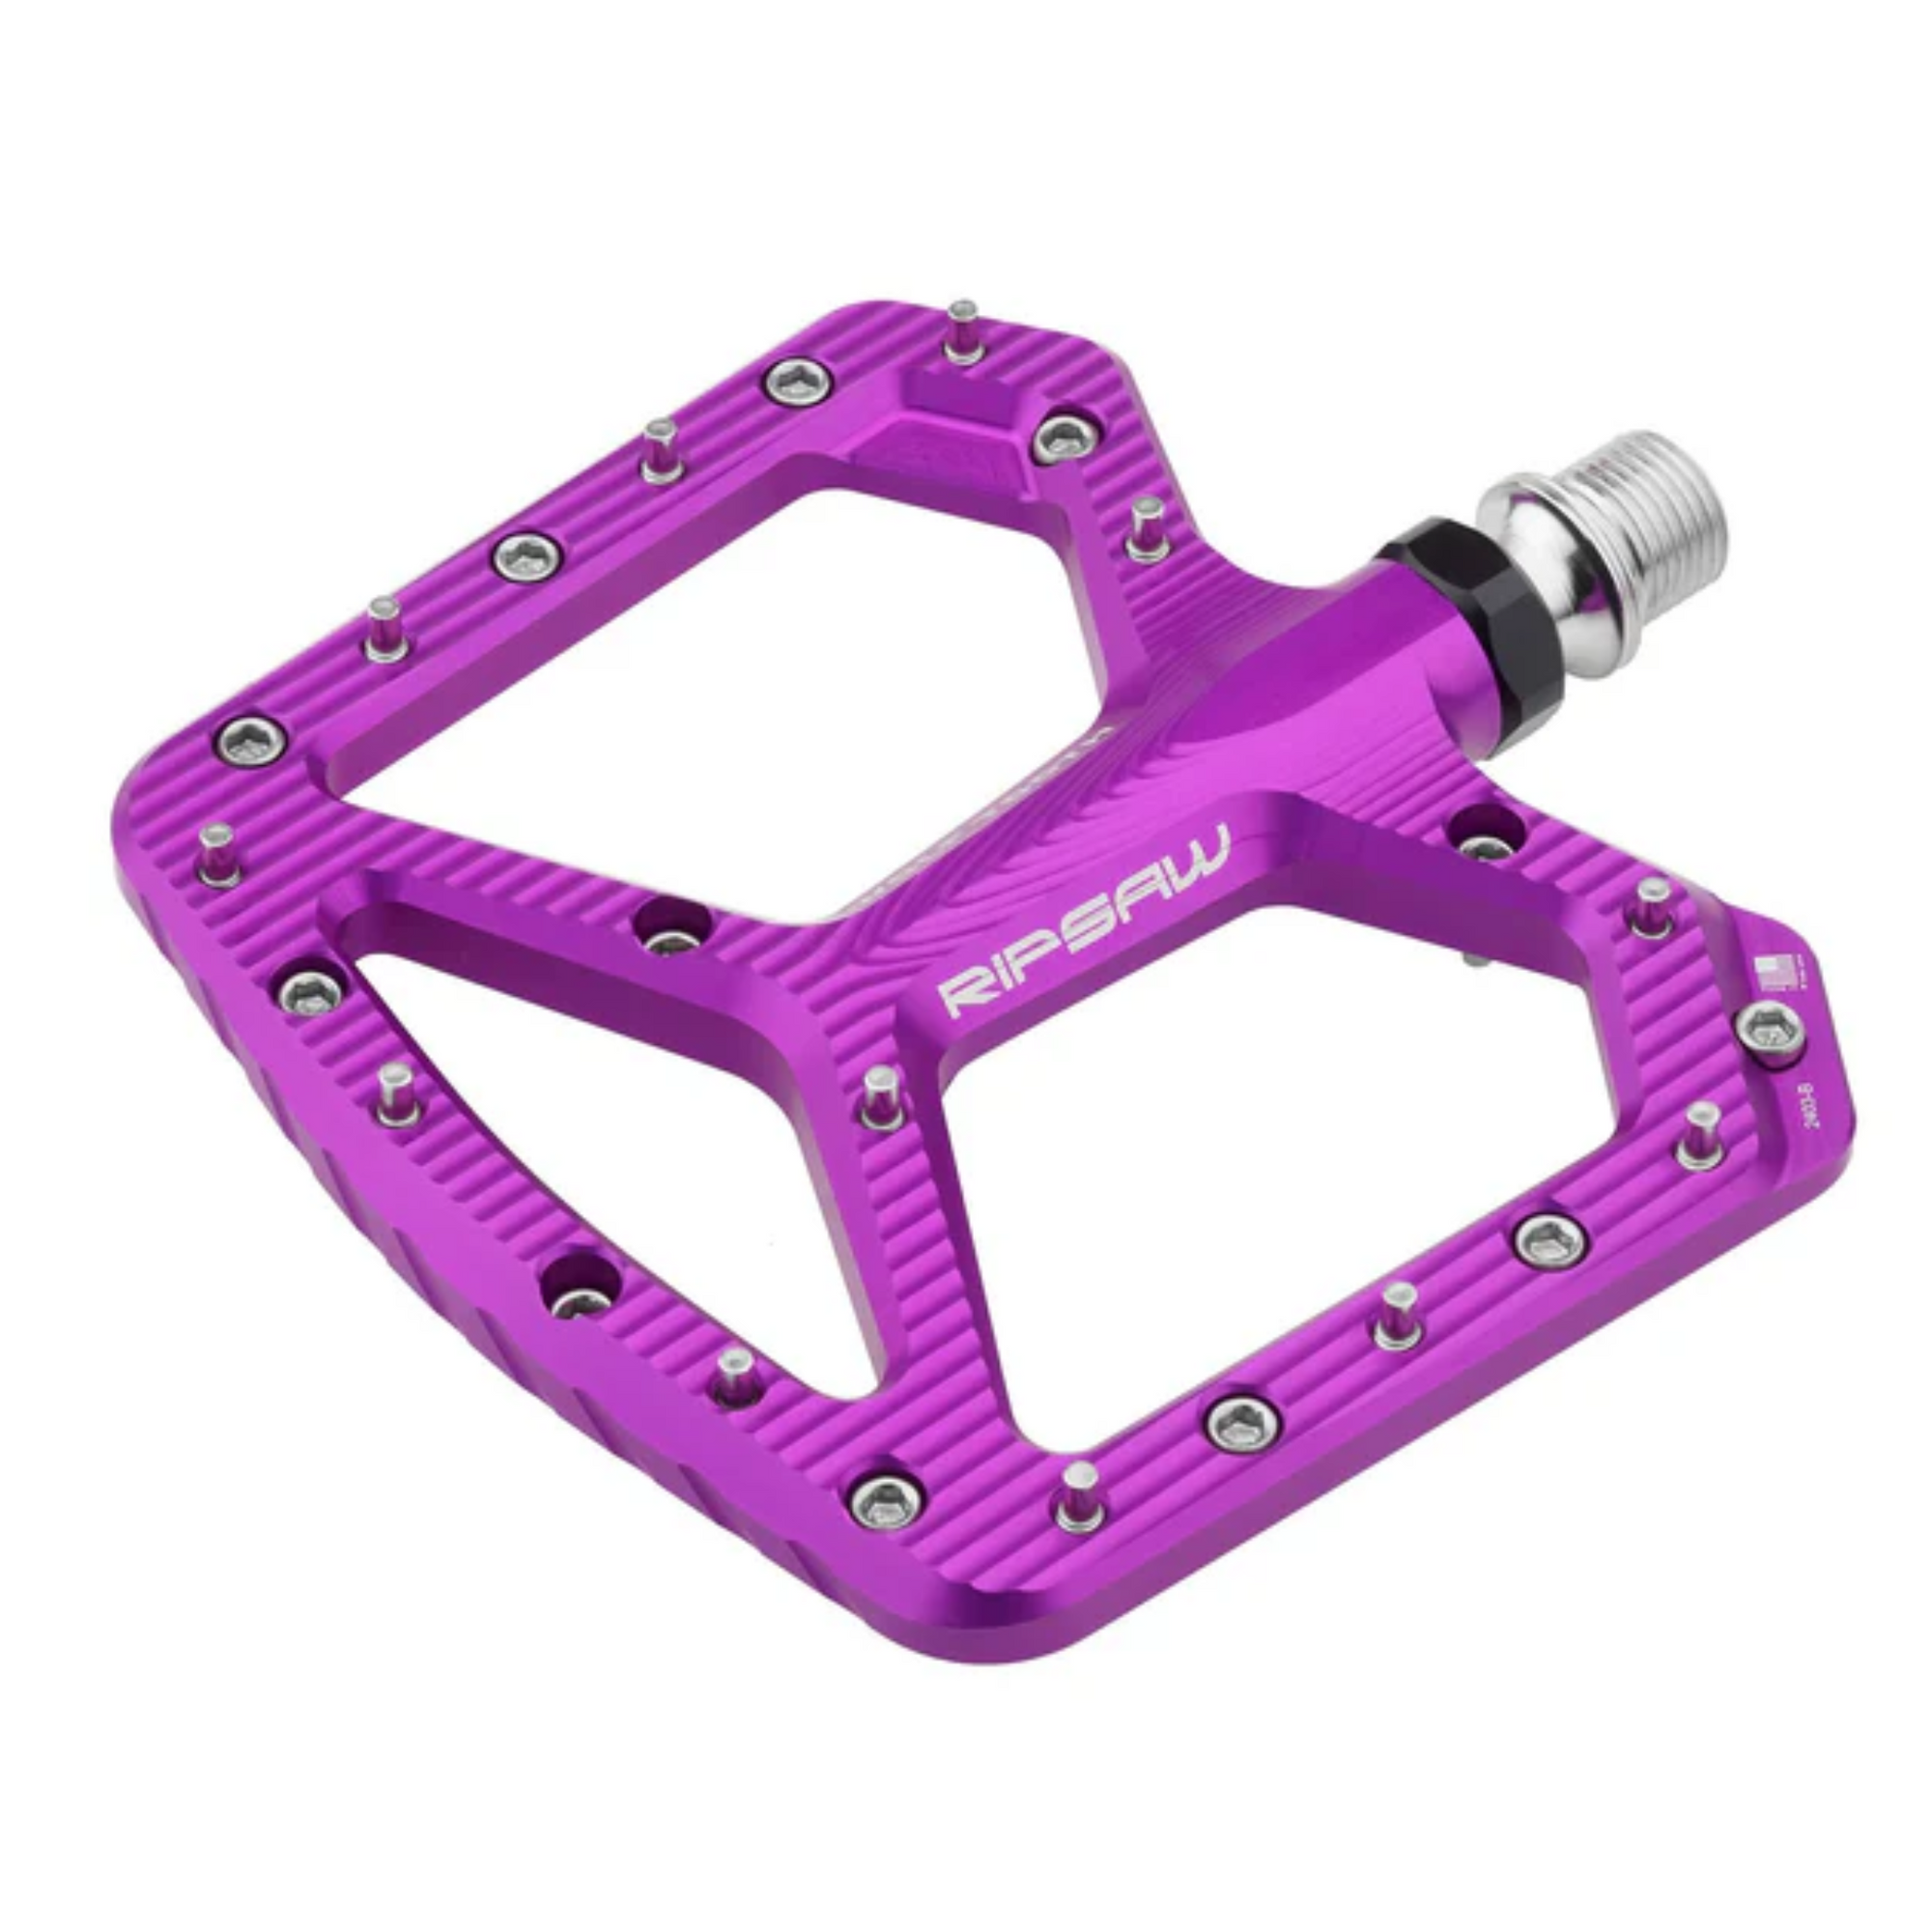 Wolf Tooth Ripsaw Aluminum Pedals